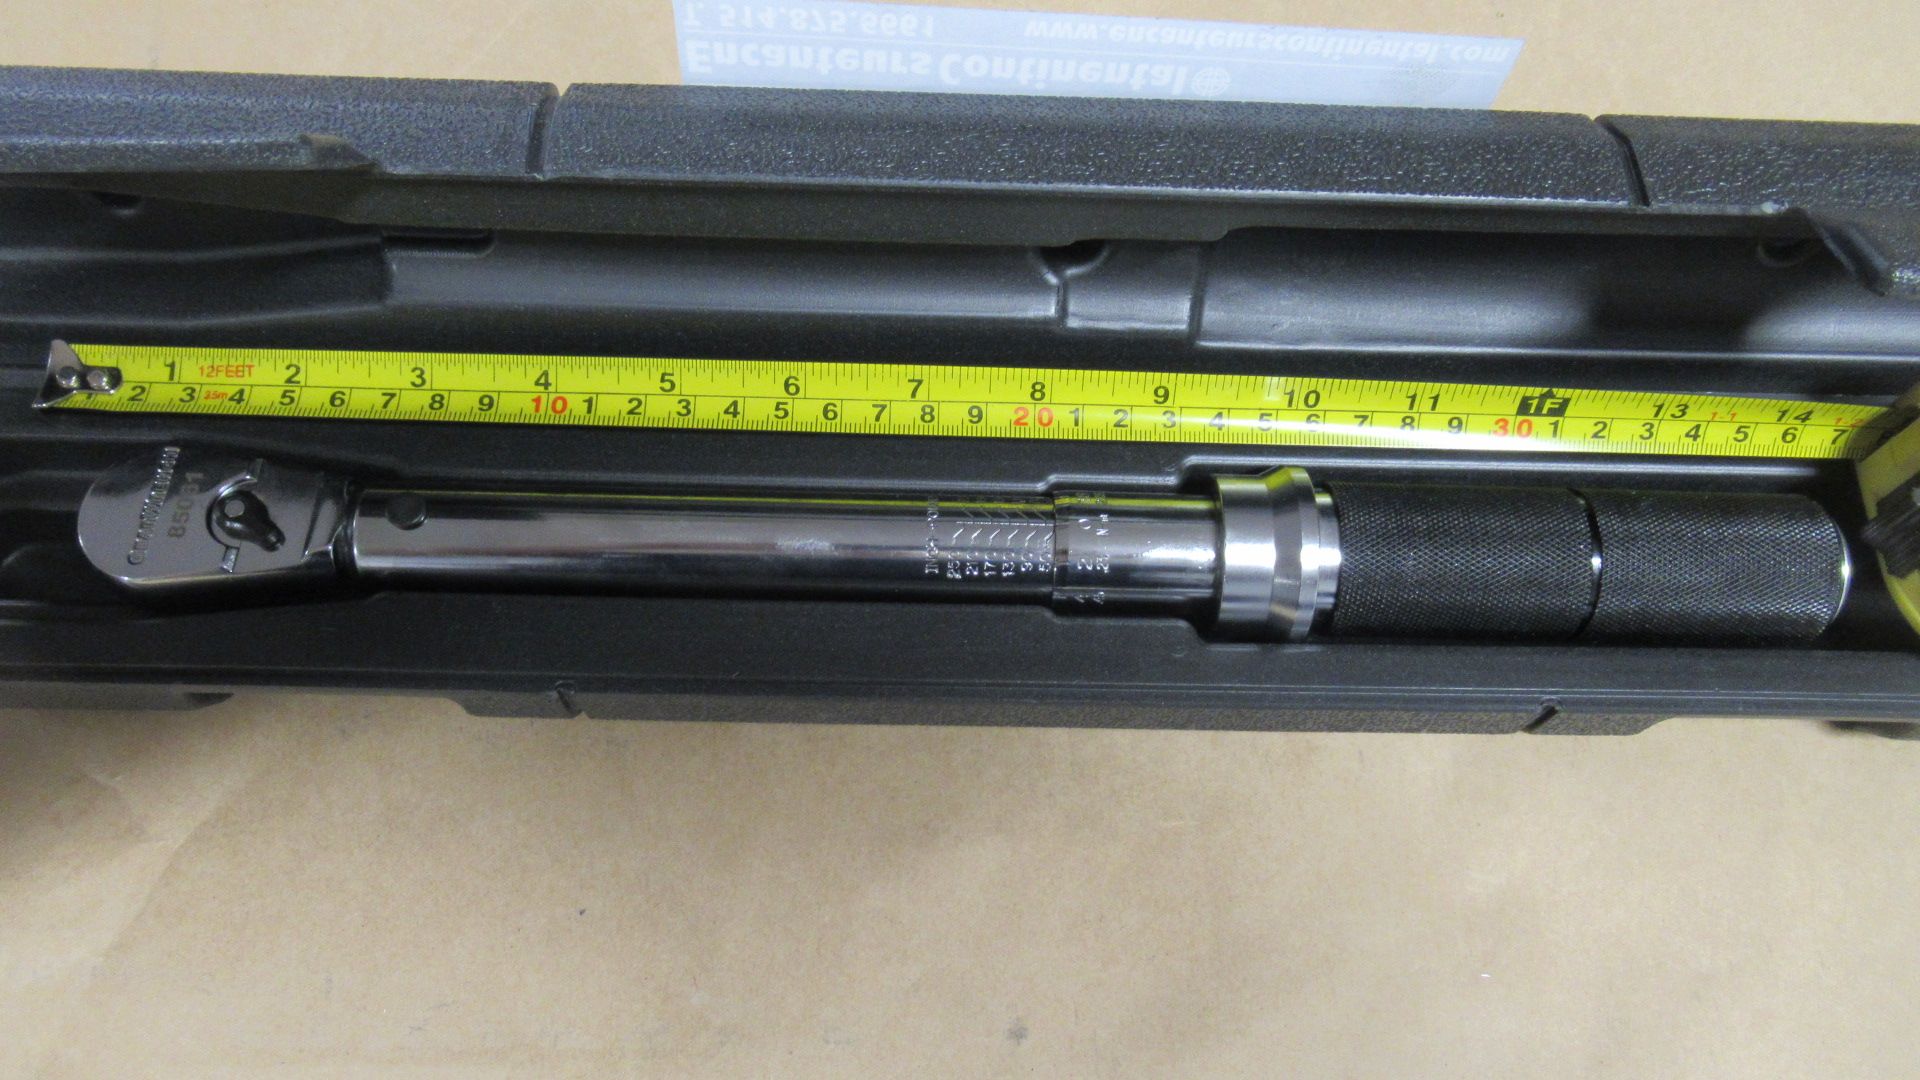 TORQUE WRENCH 3/8" 20-250 ft lbs GW 85061